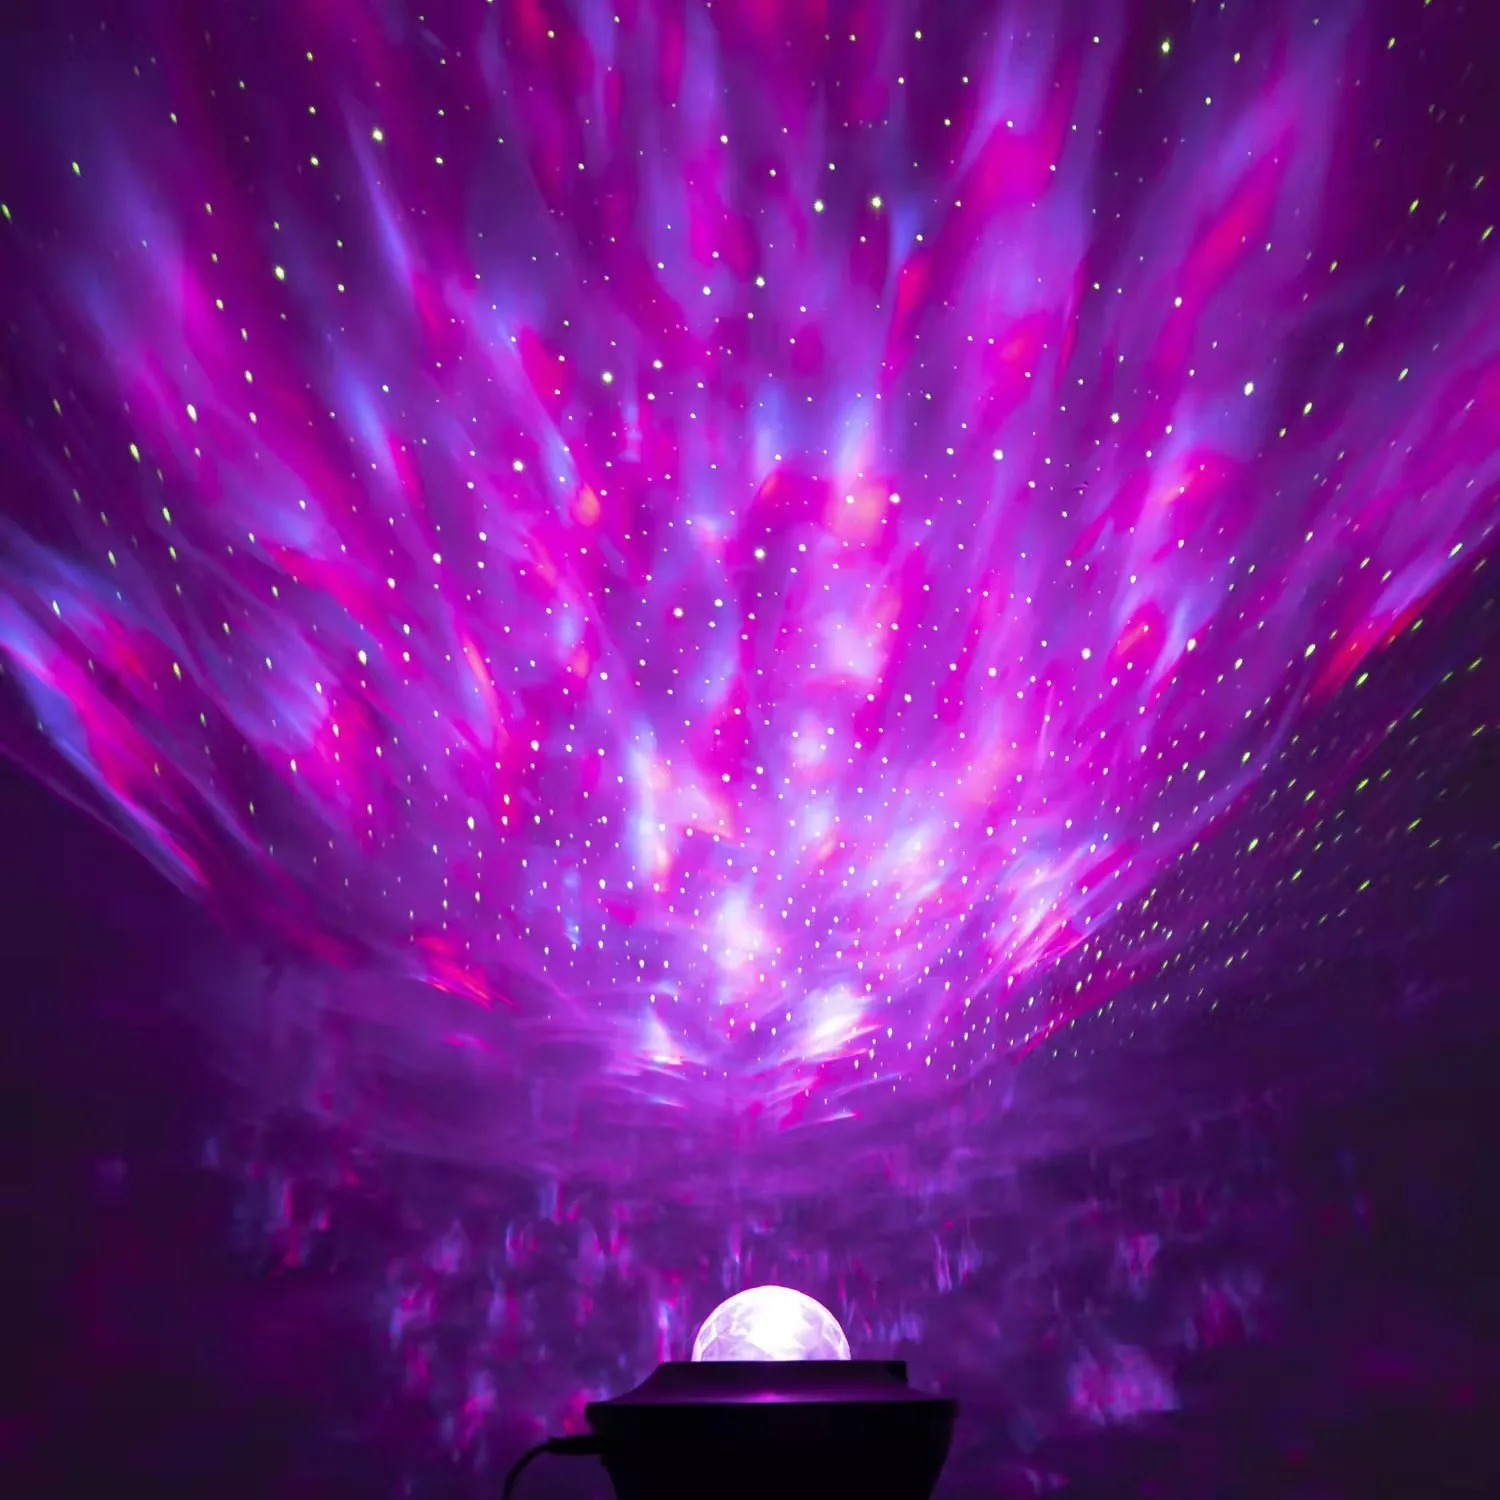 LED Star Galaxy Projector Ocean Wave Night Light Room Rotate Starry Sky Projectors Lamp Decoration Maison Pink Bedroom Dec GL61